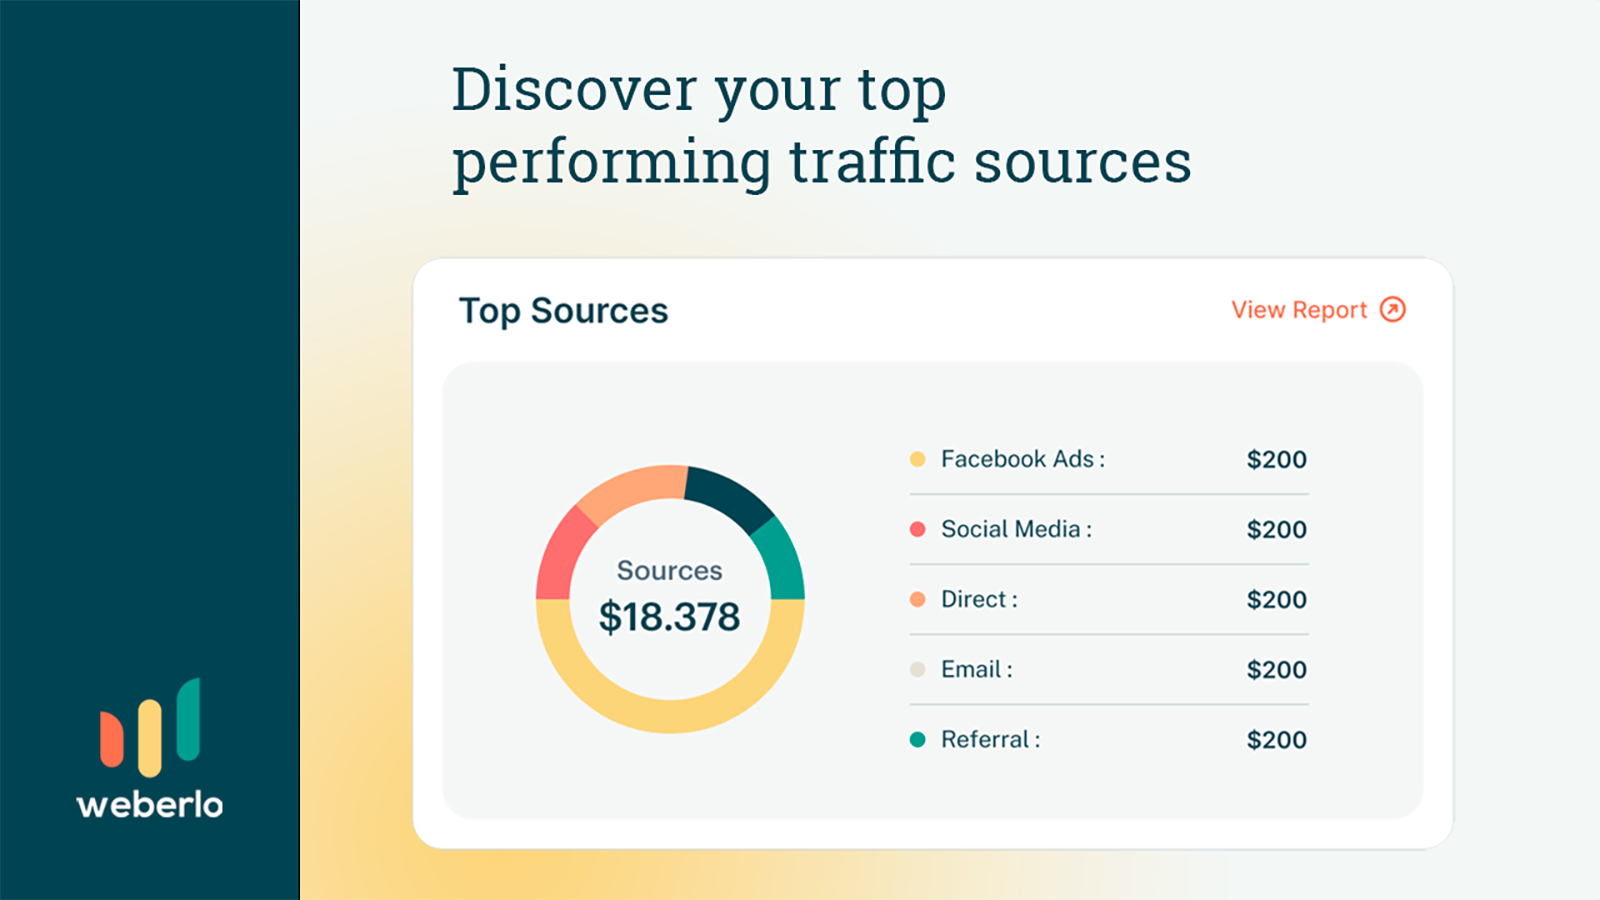 Find out your best performing traffic sources